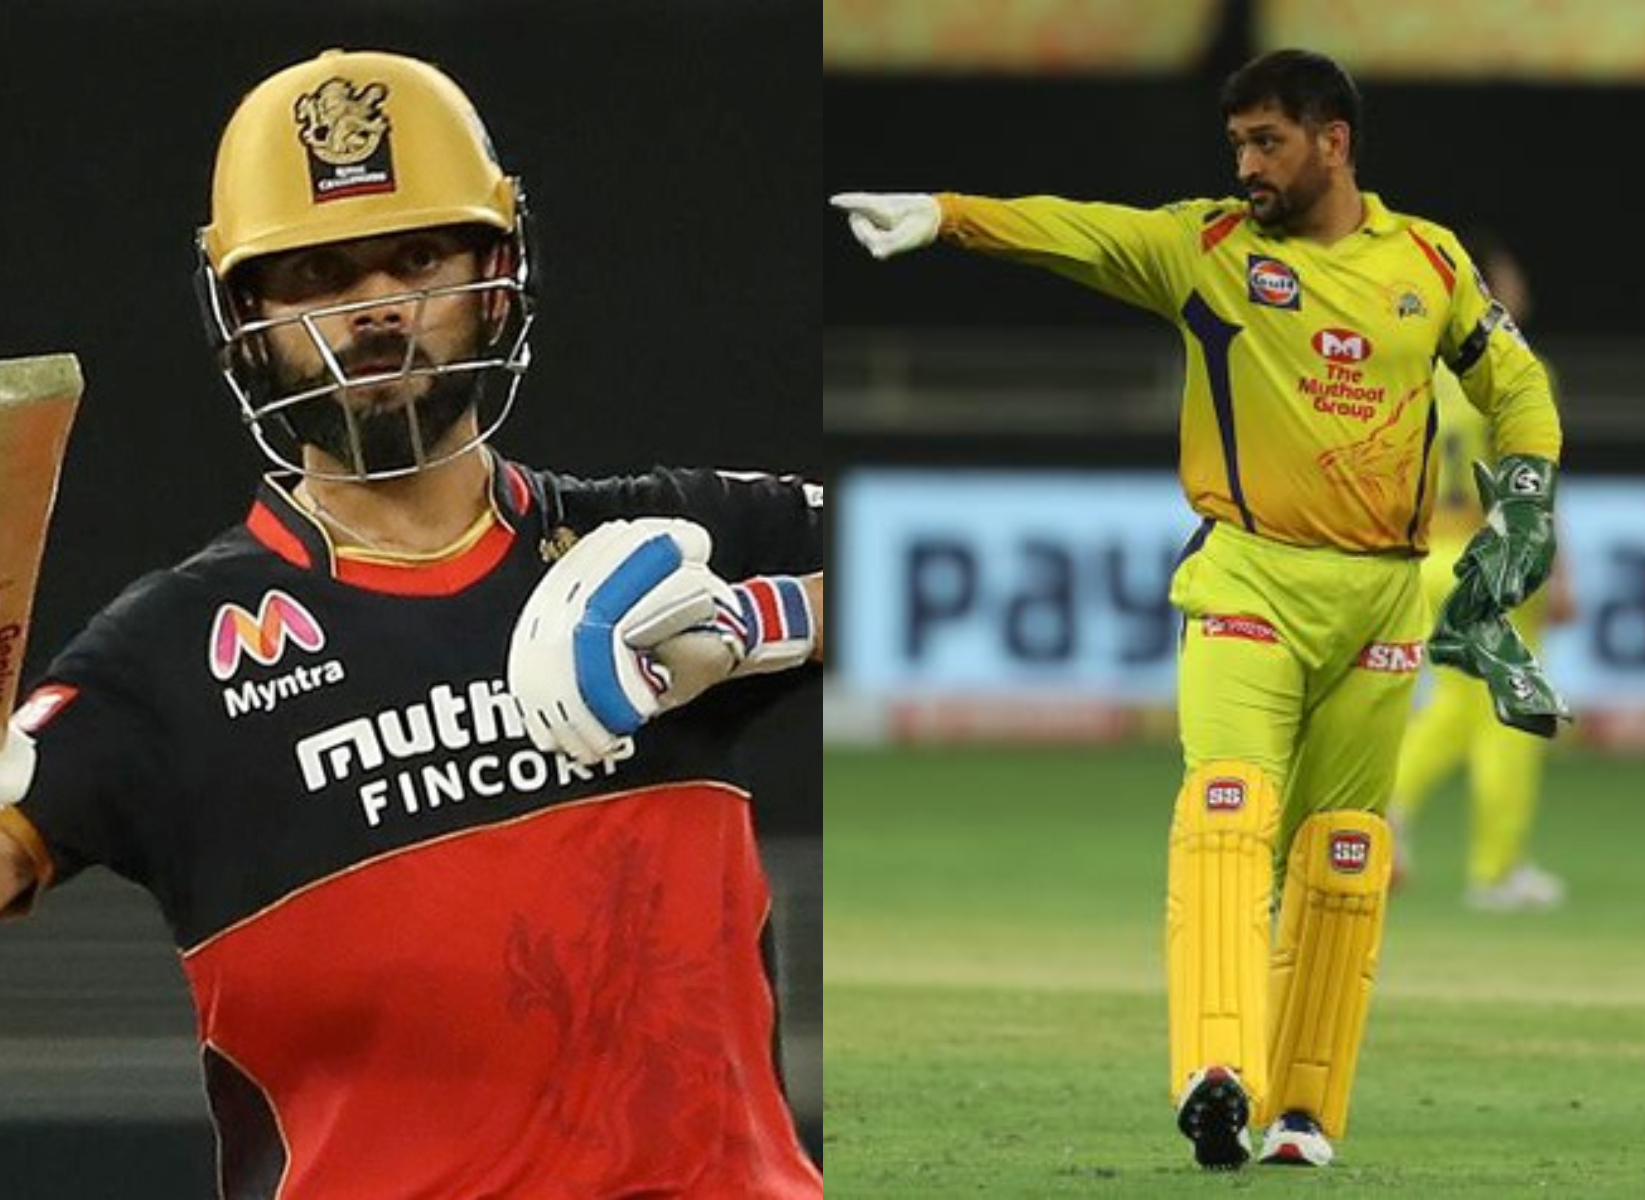 RCB had defeated CSK in their previous IPL 2020 encounter by 37 runs | BCCI/IPL